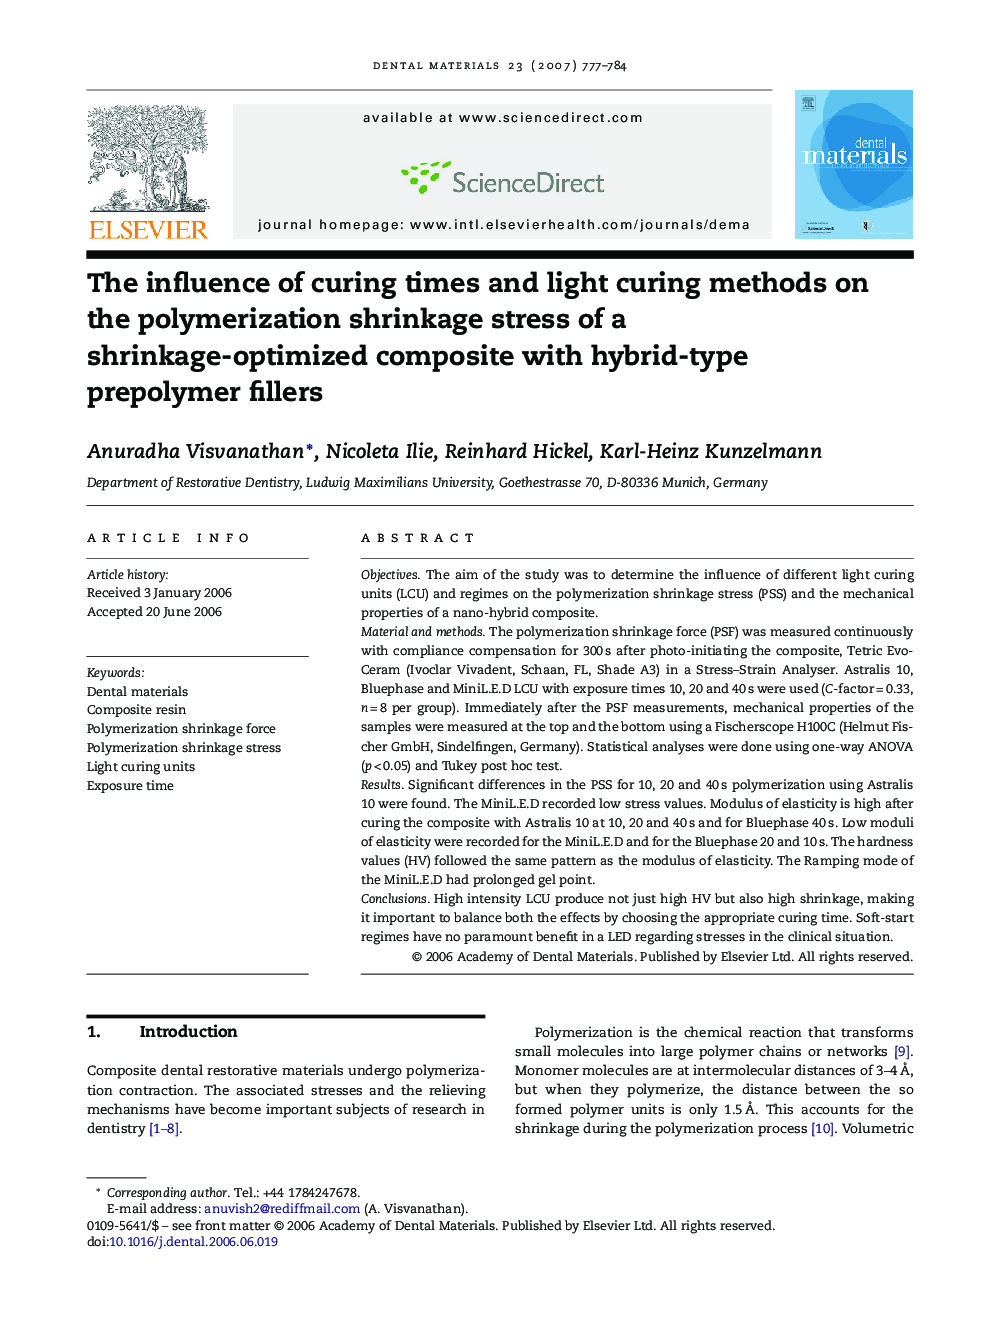 The influence of curing times and light curing methods on the polymerization shrinkage stress of a shrinkage-optimized composite with hybrid-type prepolymer fillers